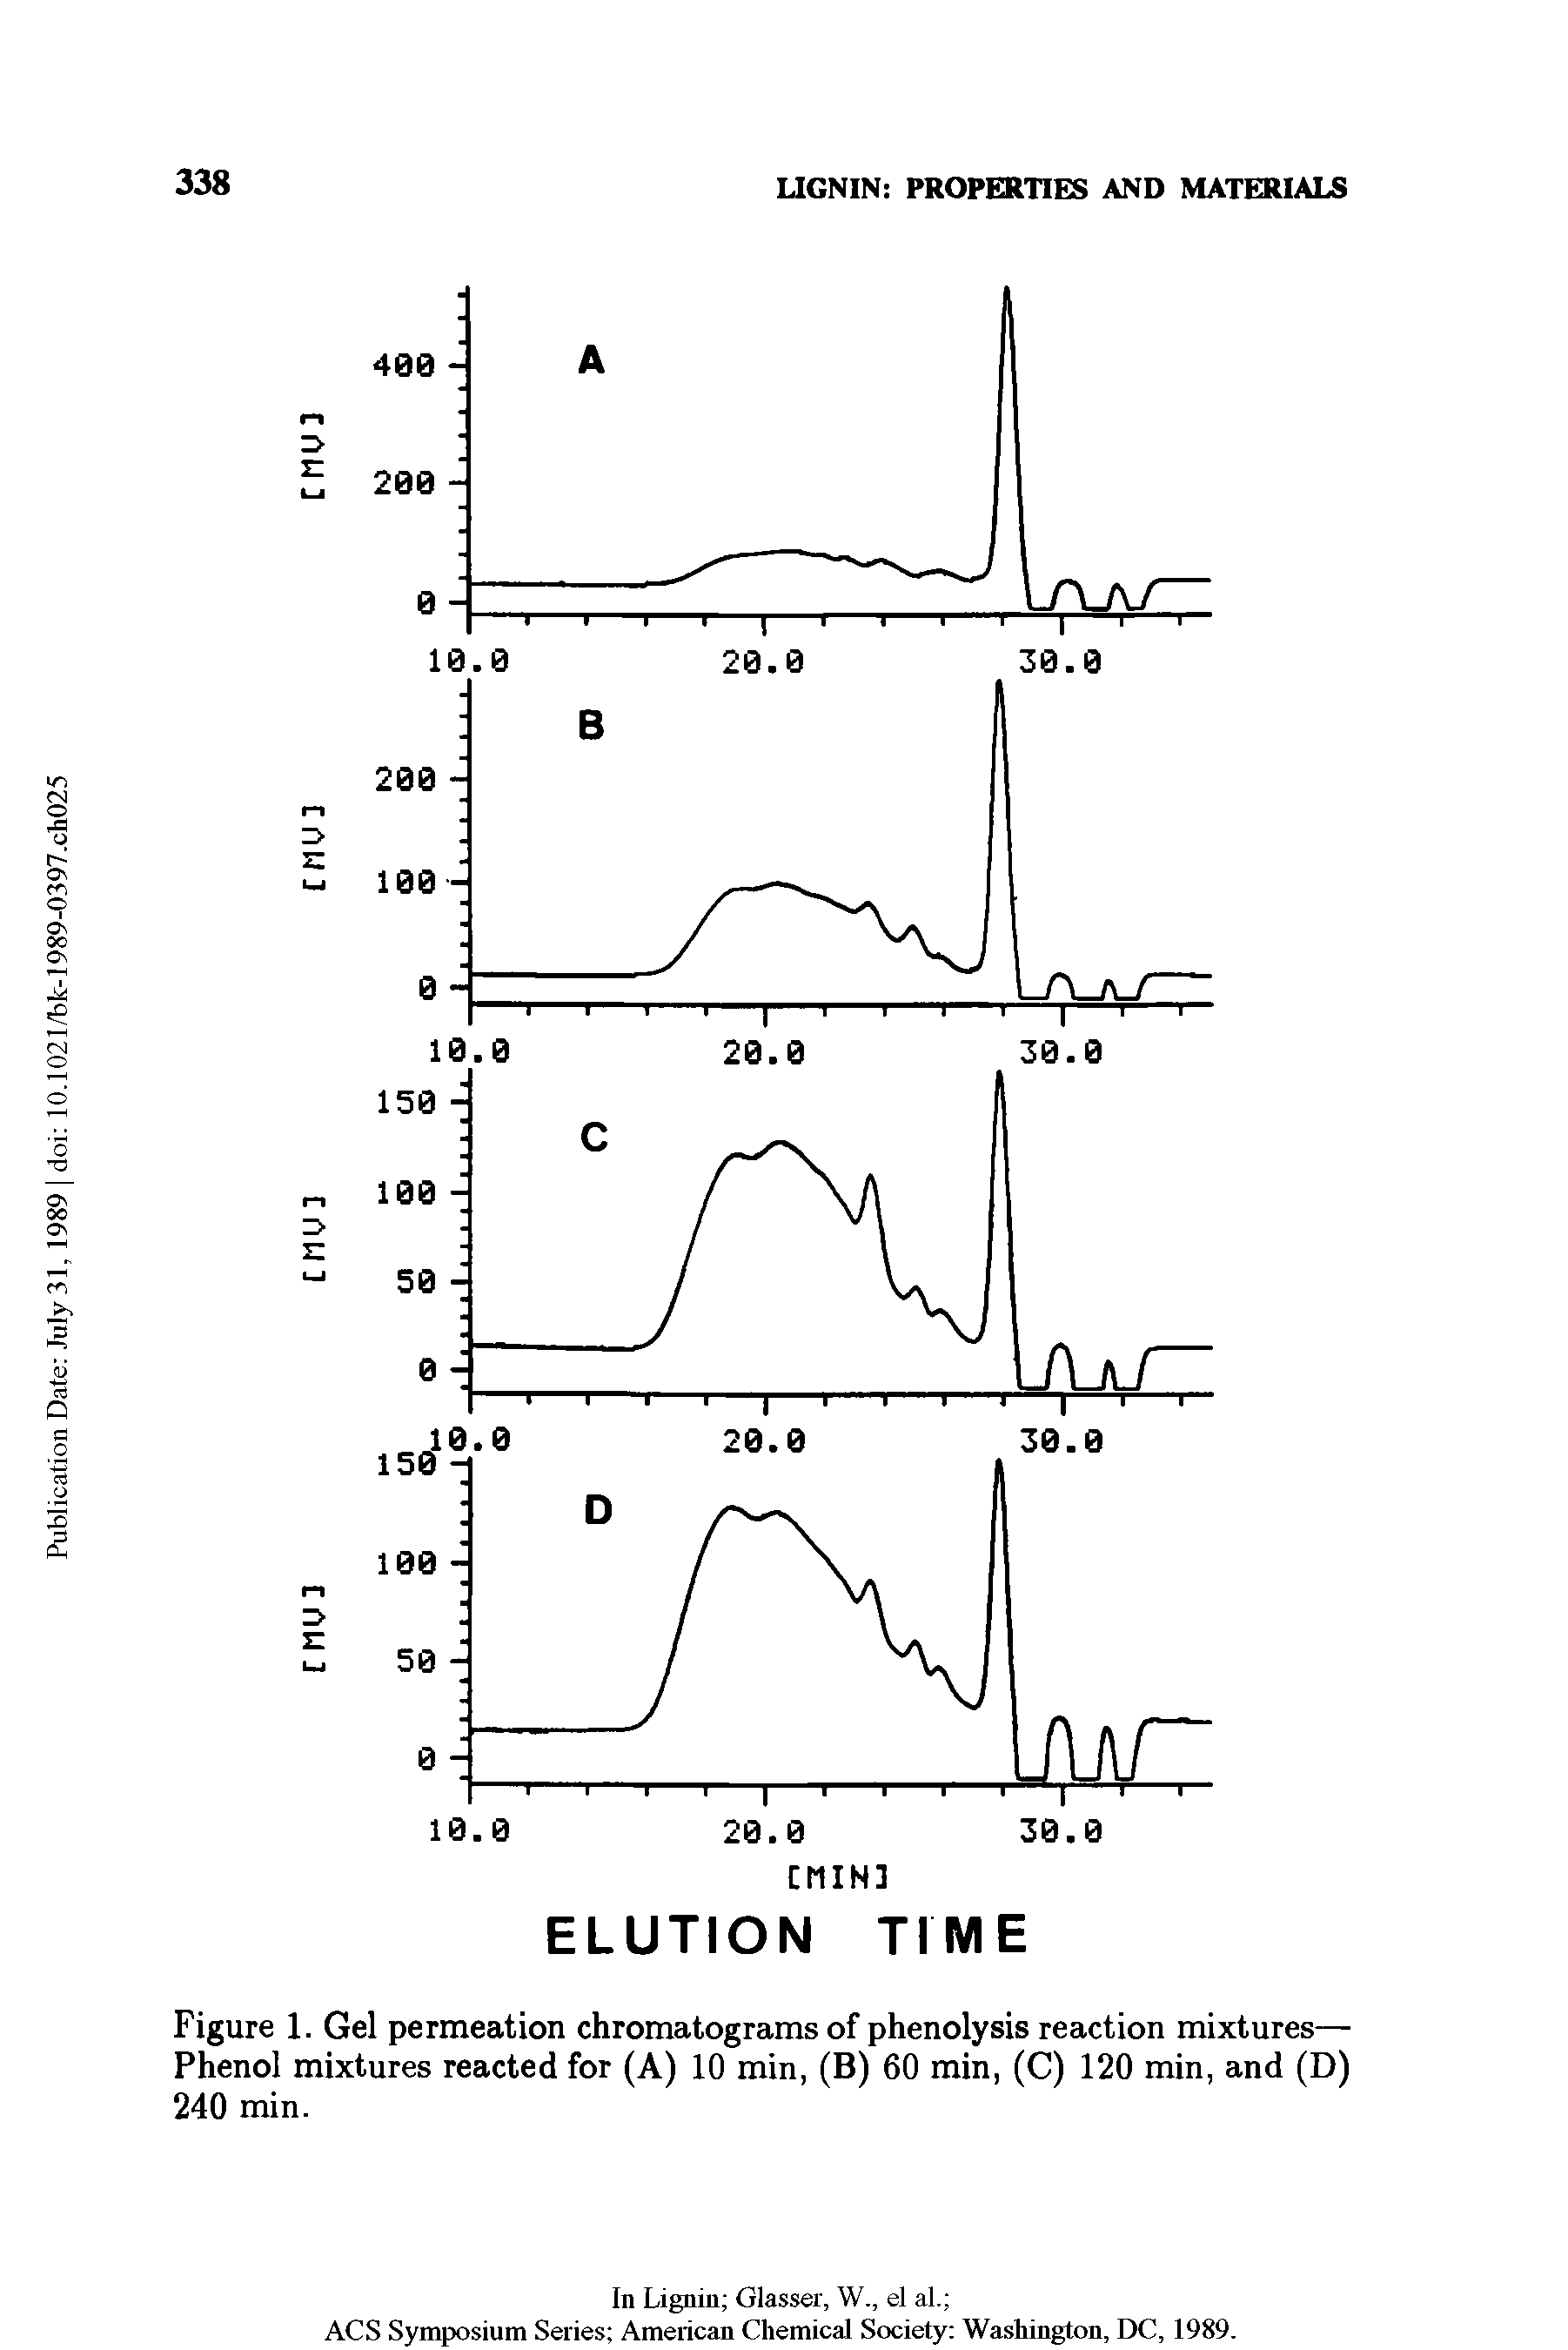 Figure 1. Gel permeation chromatograms of phenolysis reaction mixtures— Phenol mixtures reacted for (A) 10 min, (B) 60 min, (C) 120 min, and (D) 240 min.